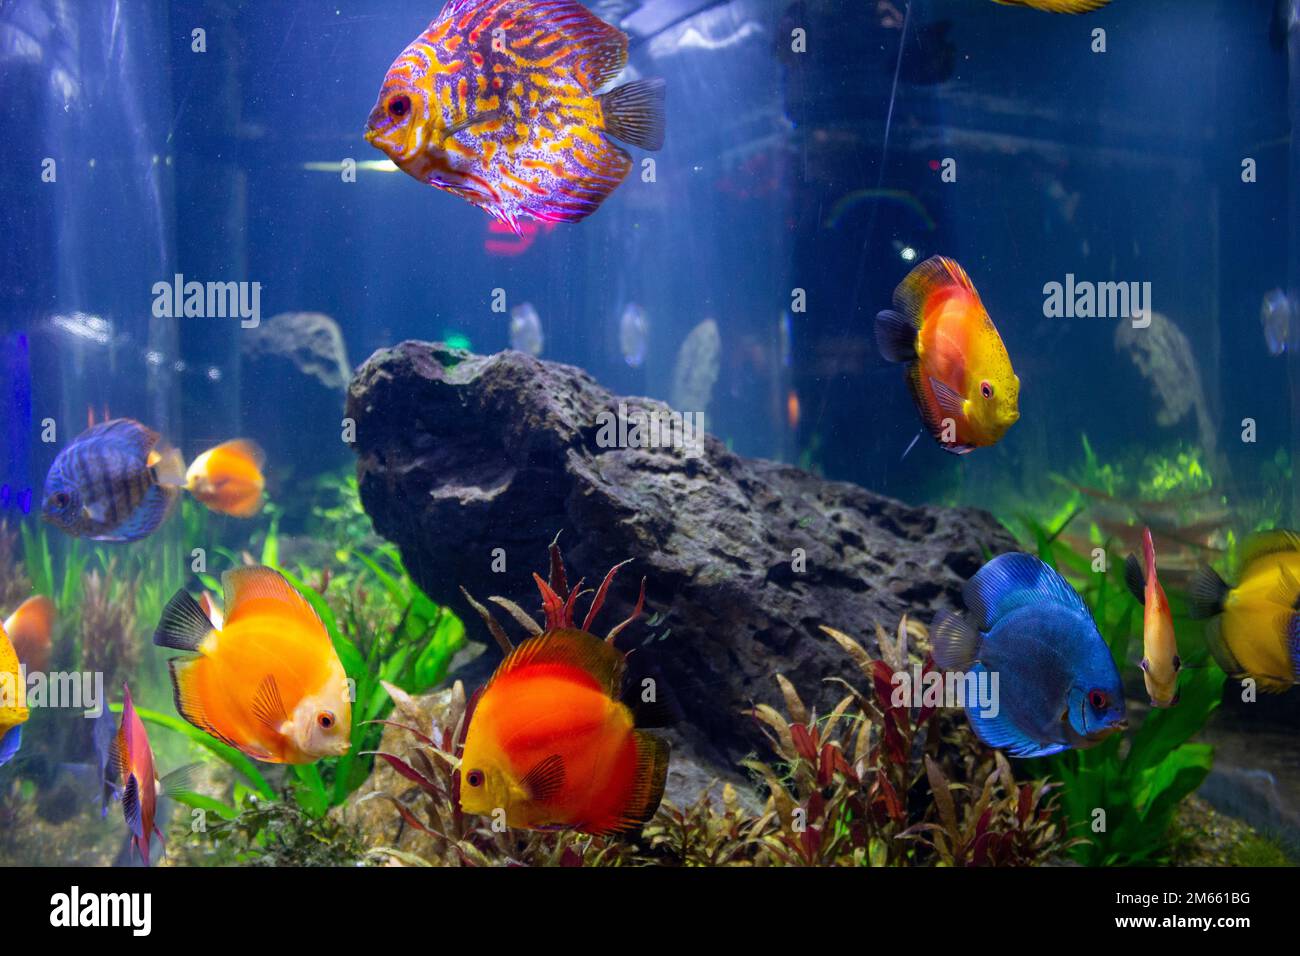 Colorful of coral reef fish with tree and plant ecosystem in an aquarium Stock Photo